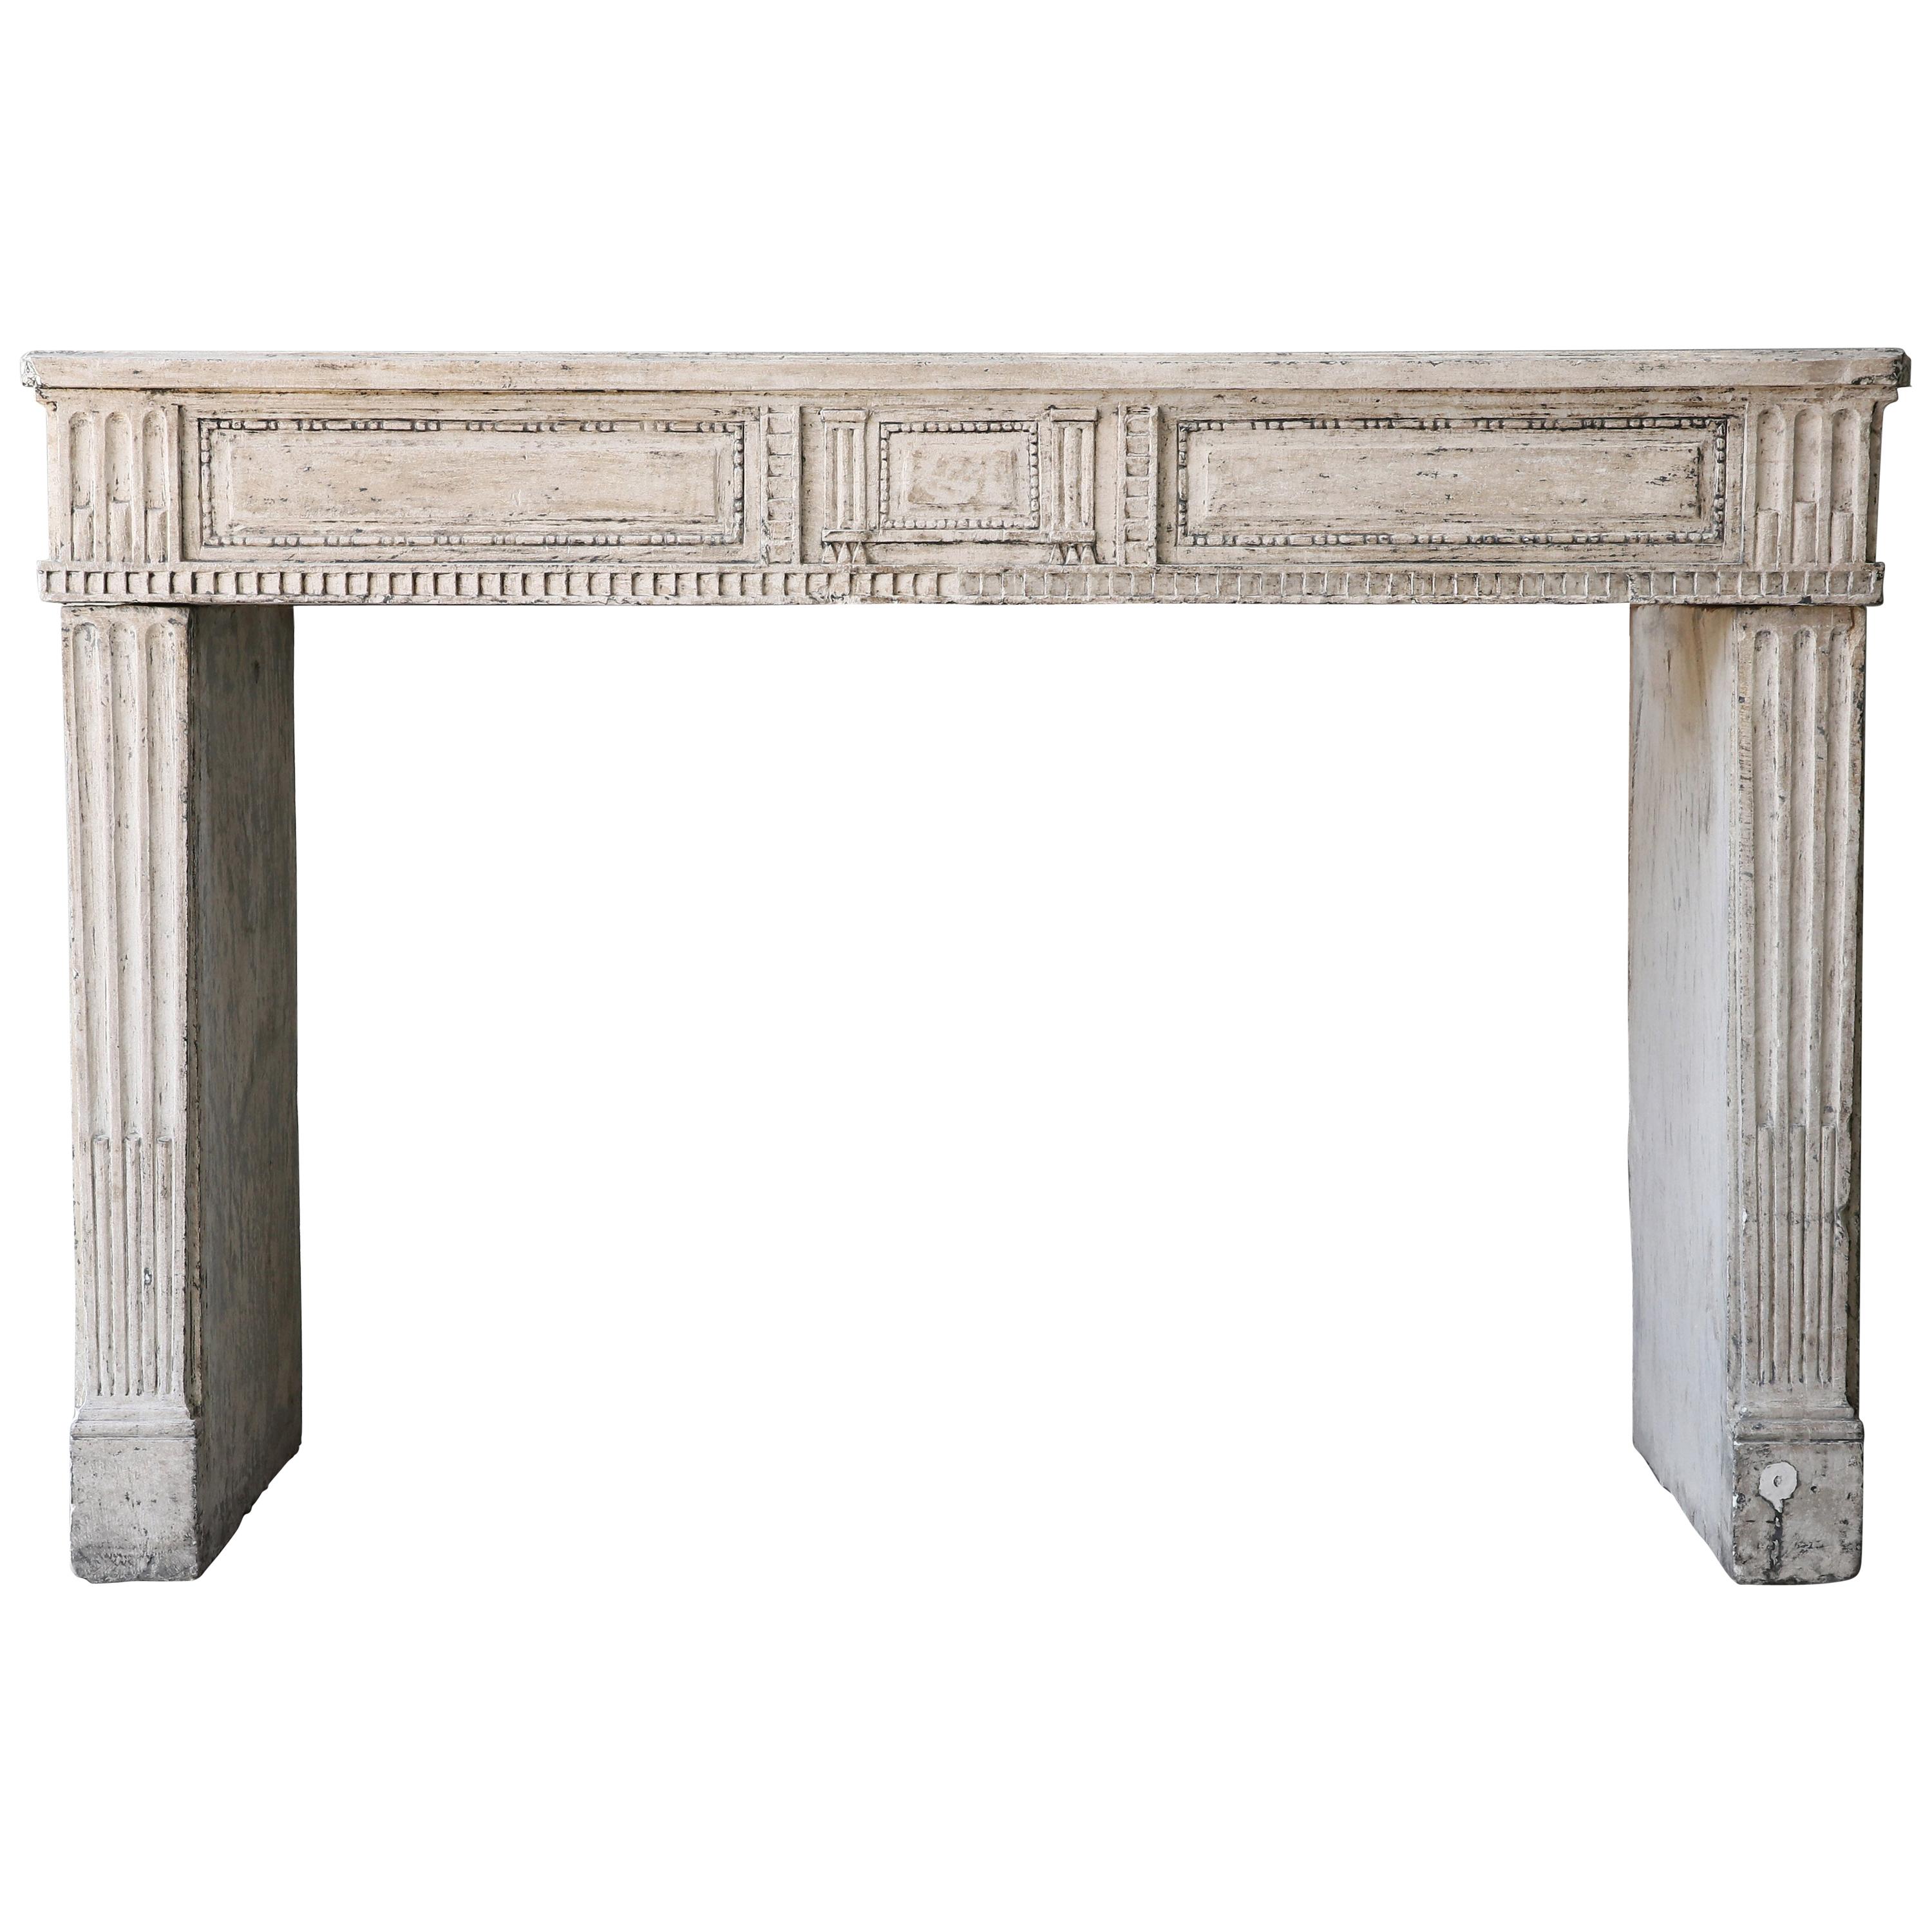 19th Century Antique Fireplace of French Limestone in Style of Louis XVI